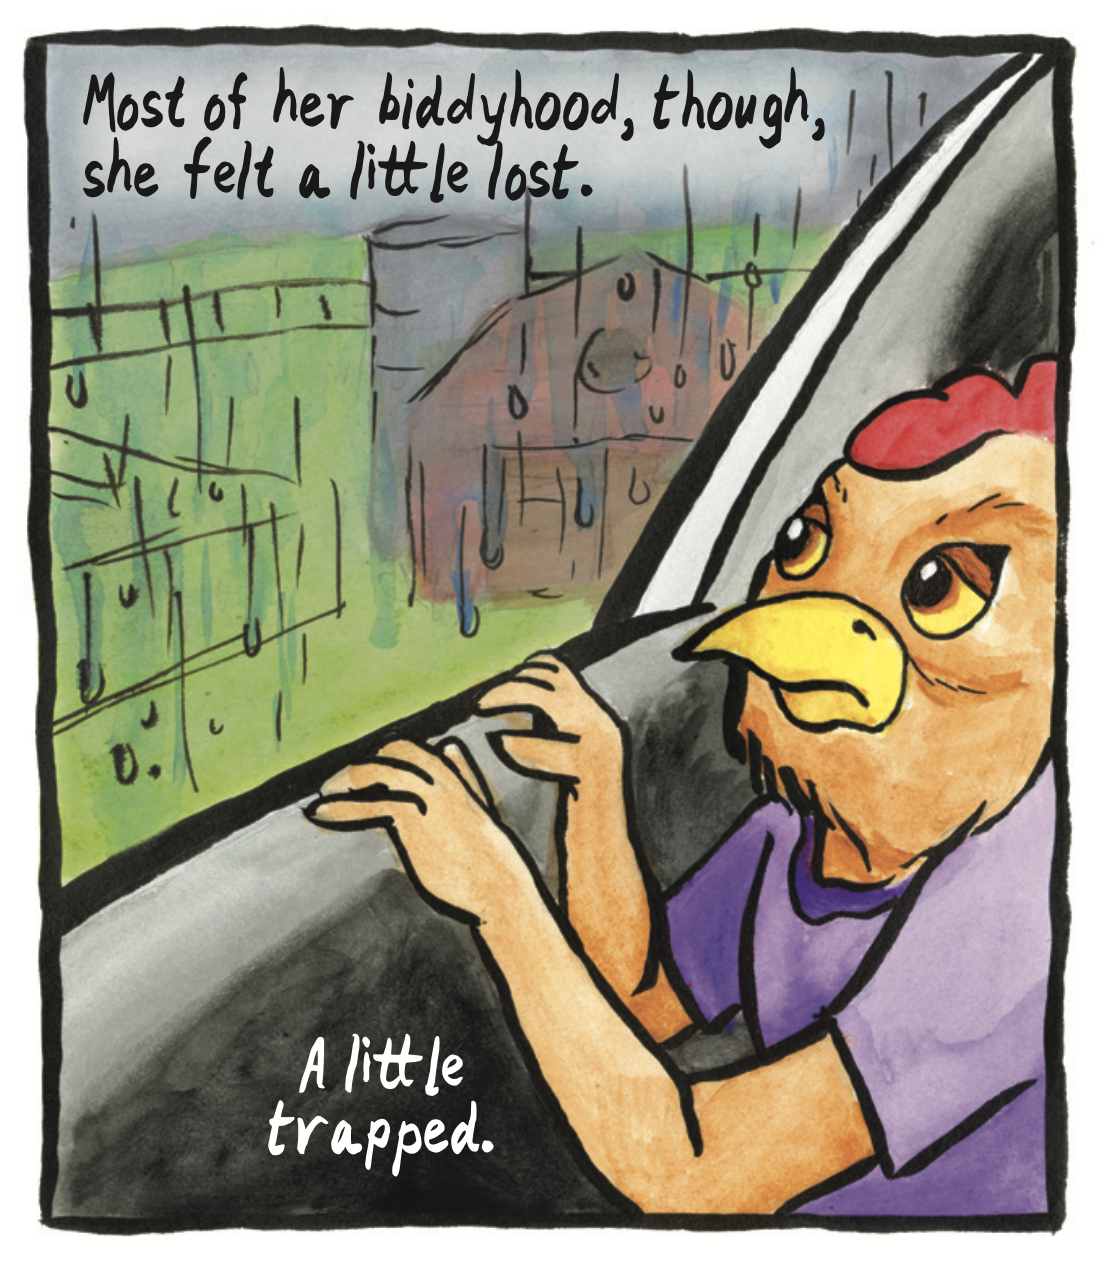 â€œMost of her biddyhood, though, she felt a little lost. A little trapped.â€ The red chicken looks out of a car window at a rainy day outside the barn.